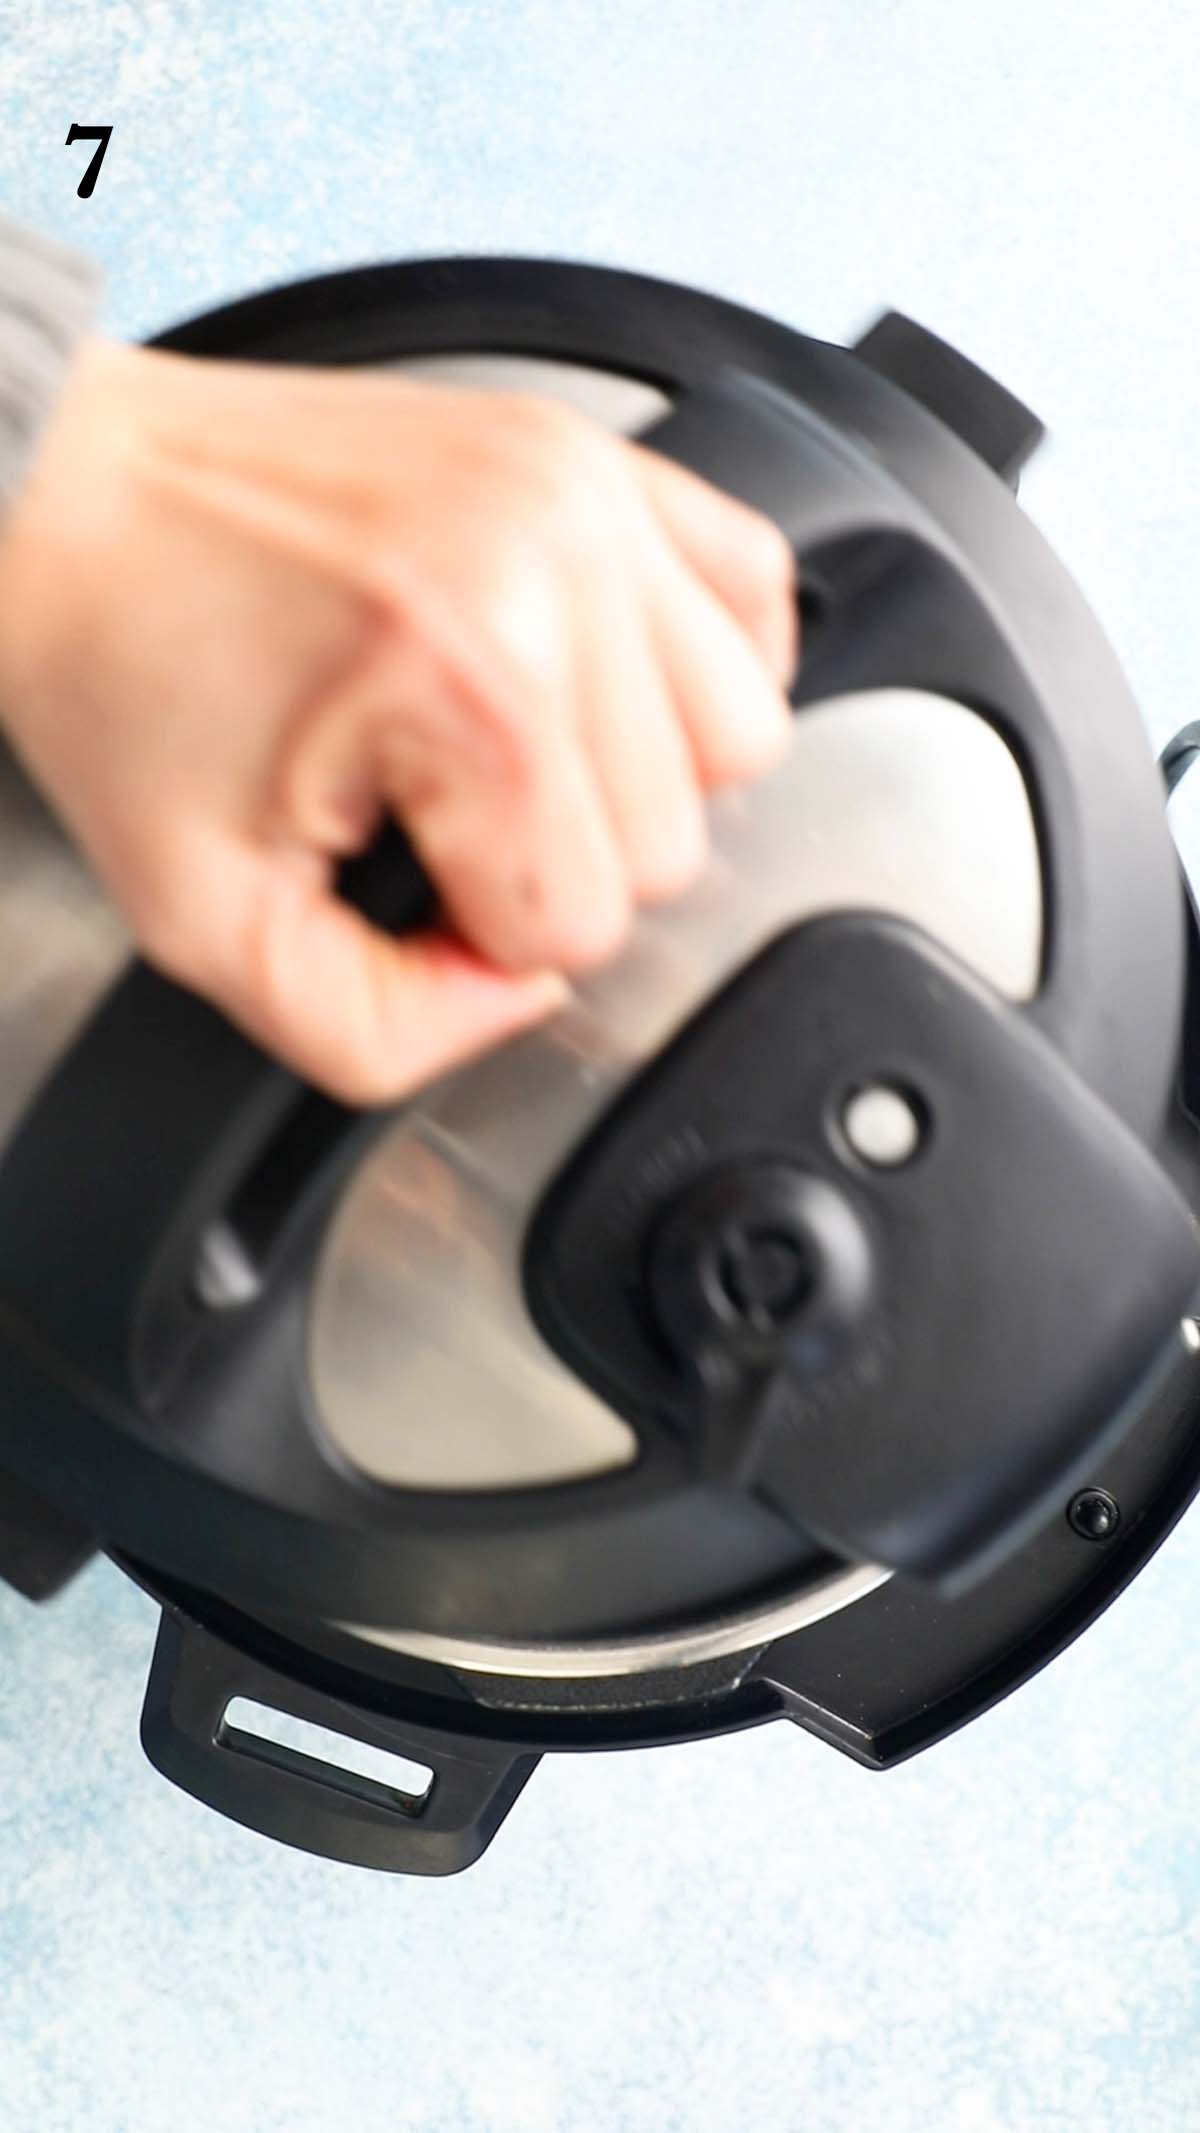 a hand closing an instant pot with a lid.